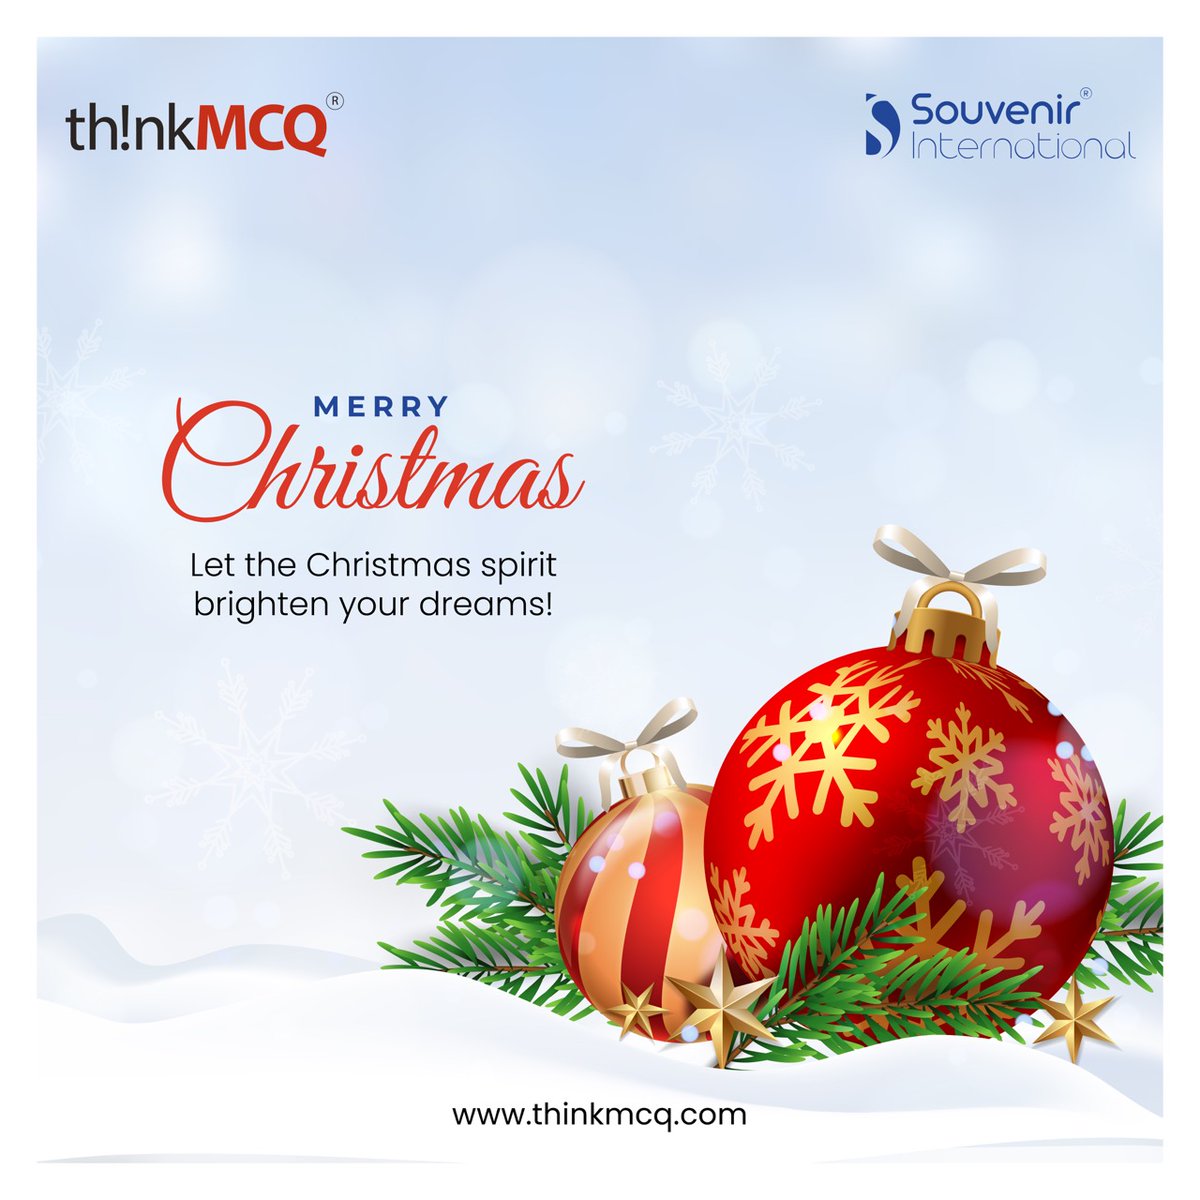 Christmas is a magical time of year. Let all your dreams come true this Christmas, and may it bring colours to your life.
.
.
.
.
.
.
.
#HappyChristmas #souvenirintl #thinkmcq #uaejobs #medicaljobsuae #doctorsjobs #healthcarejobsuae #healthcareconsultancy #uaejobconsultancy